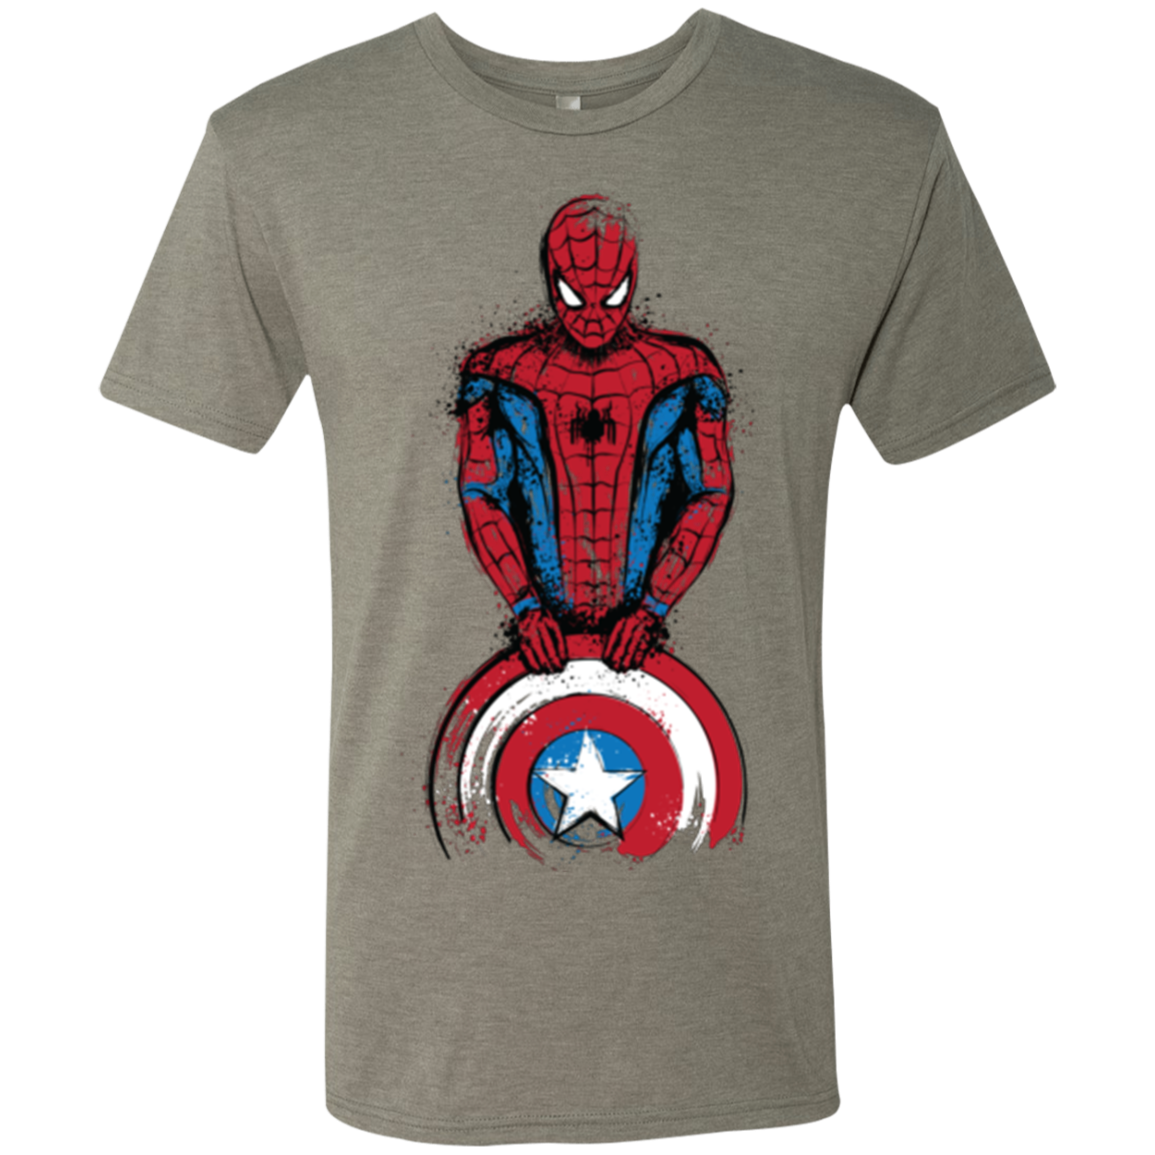 The Spider is Coming Men's Triblend T-Shirt